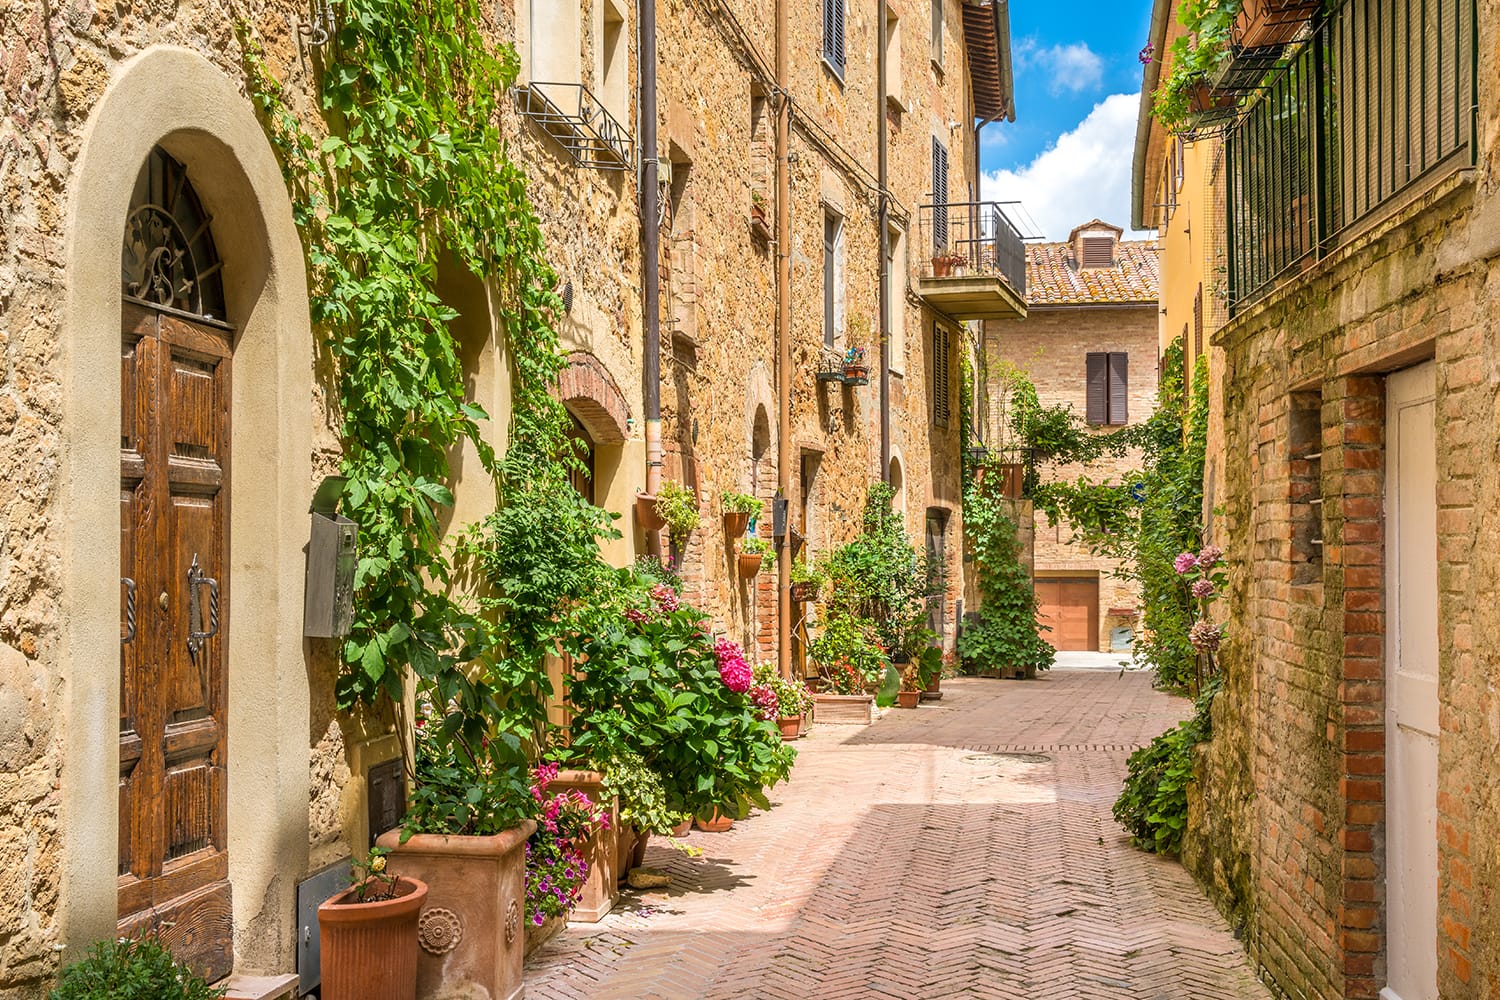 Old streets in Pienza, Italy